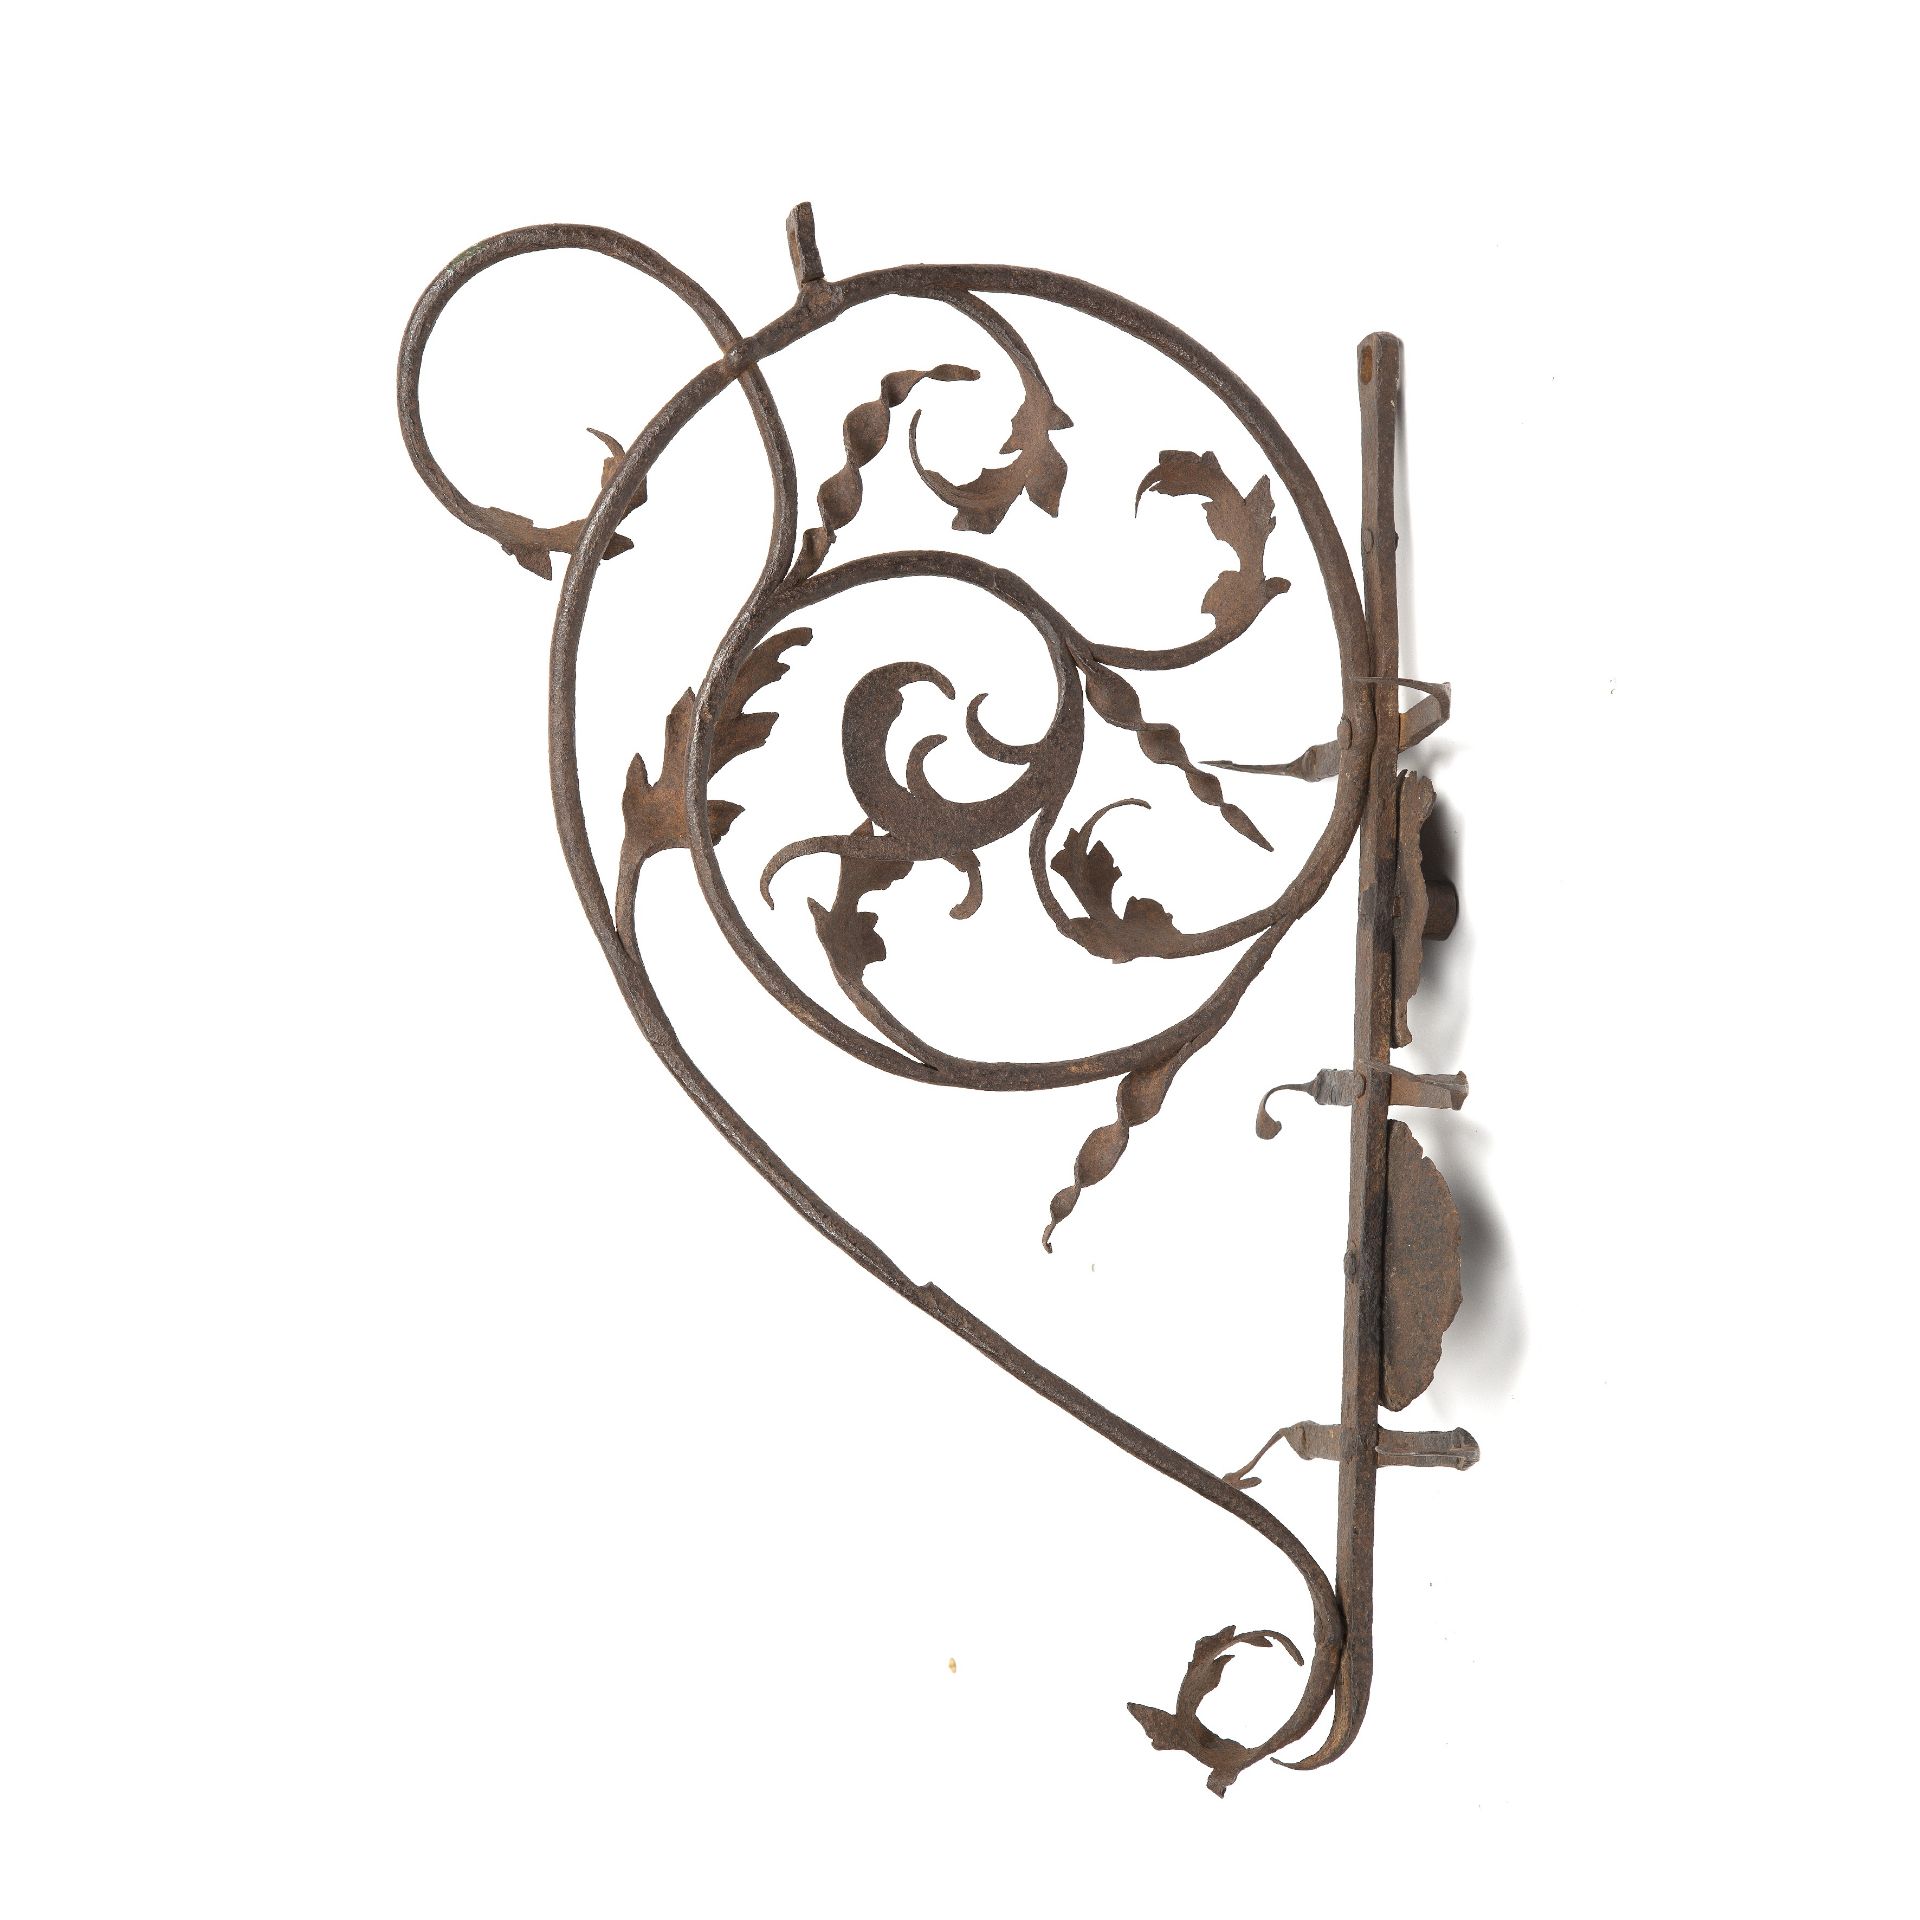 An early 18th century wrought iron bracket with two candle sconces and foliate designs 60cm x 45cm - Bild 2 aus 2